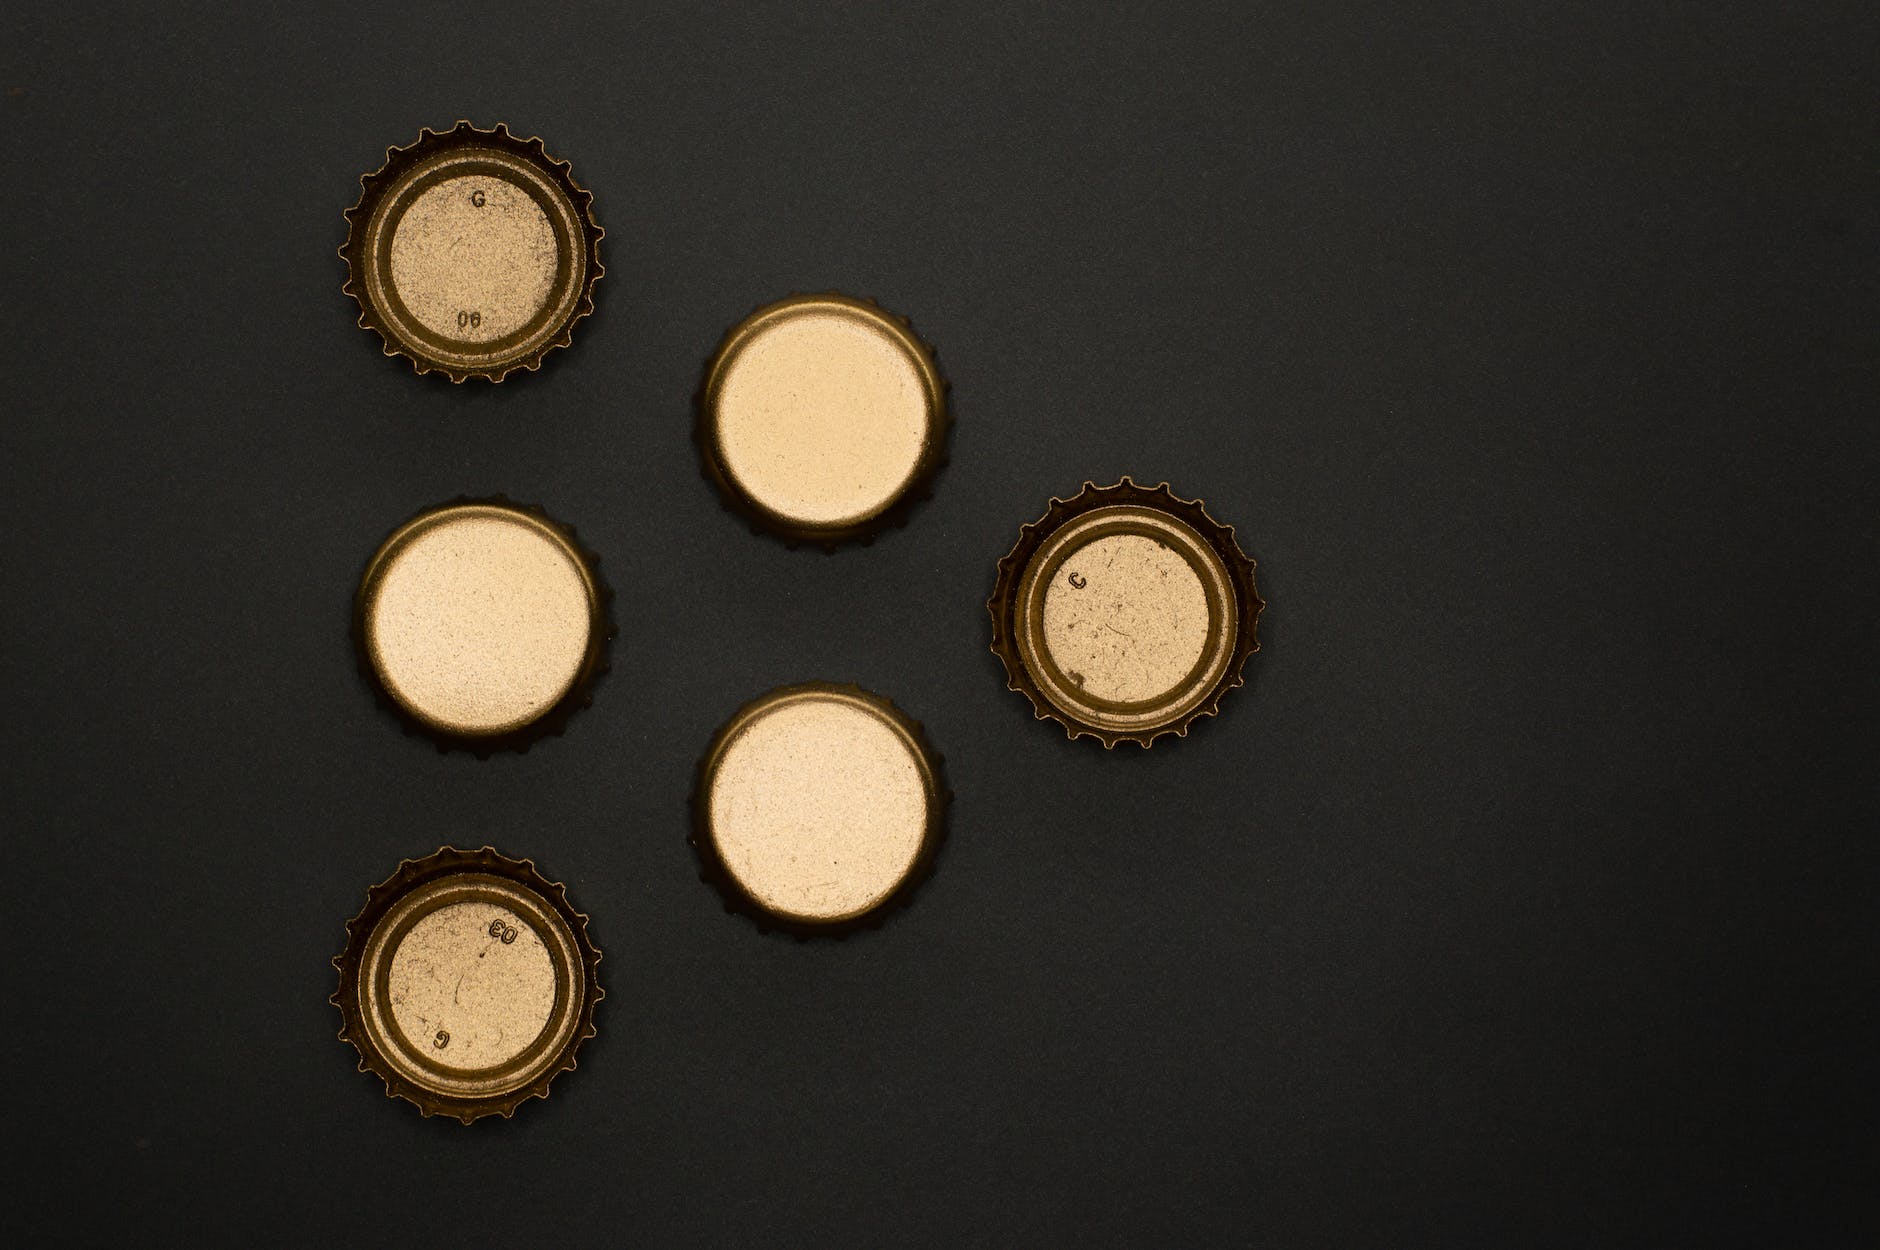 bottle caps on a black surface in close up photography